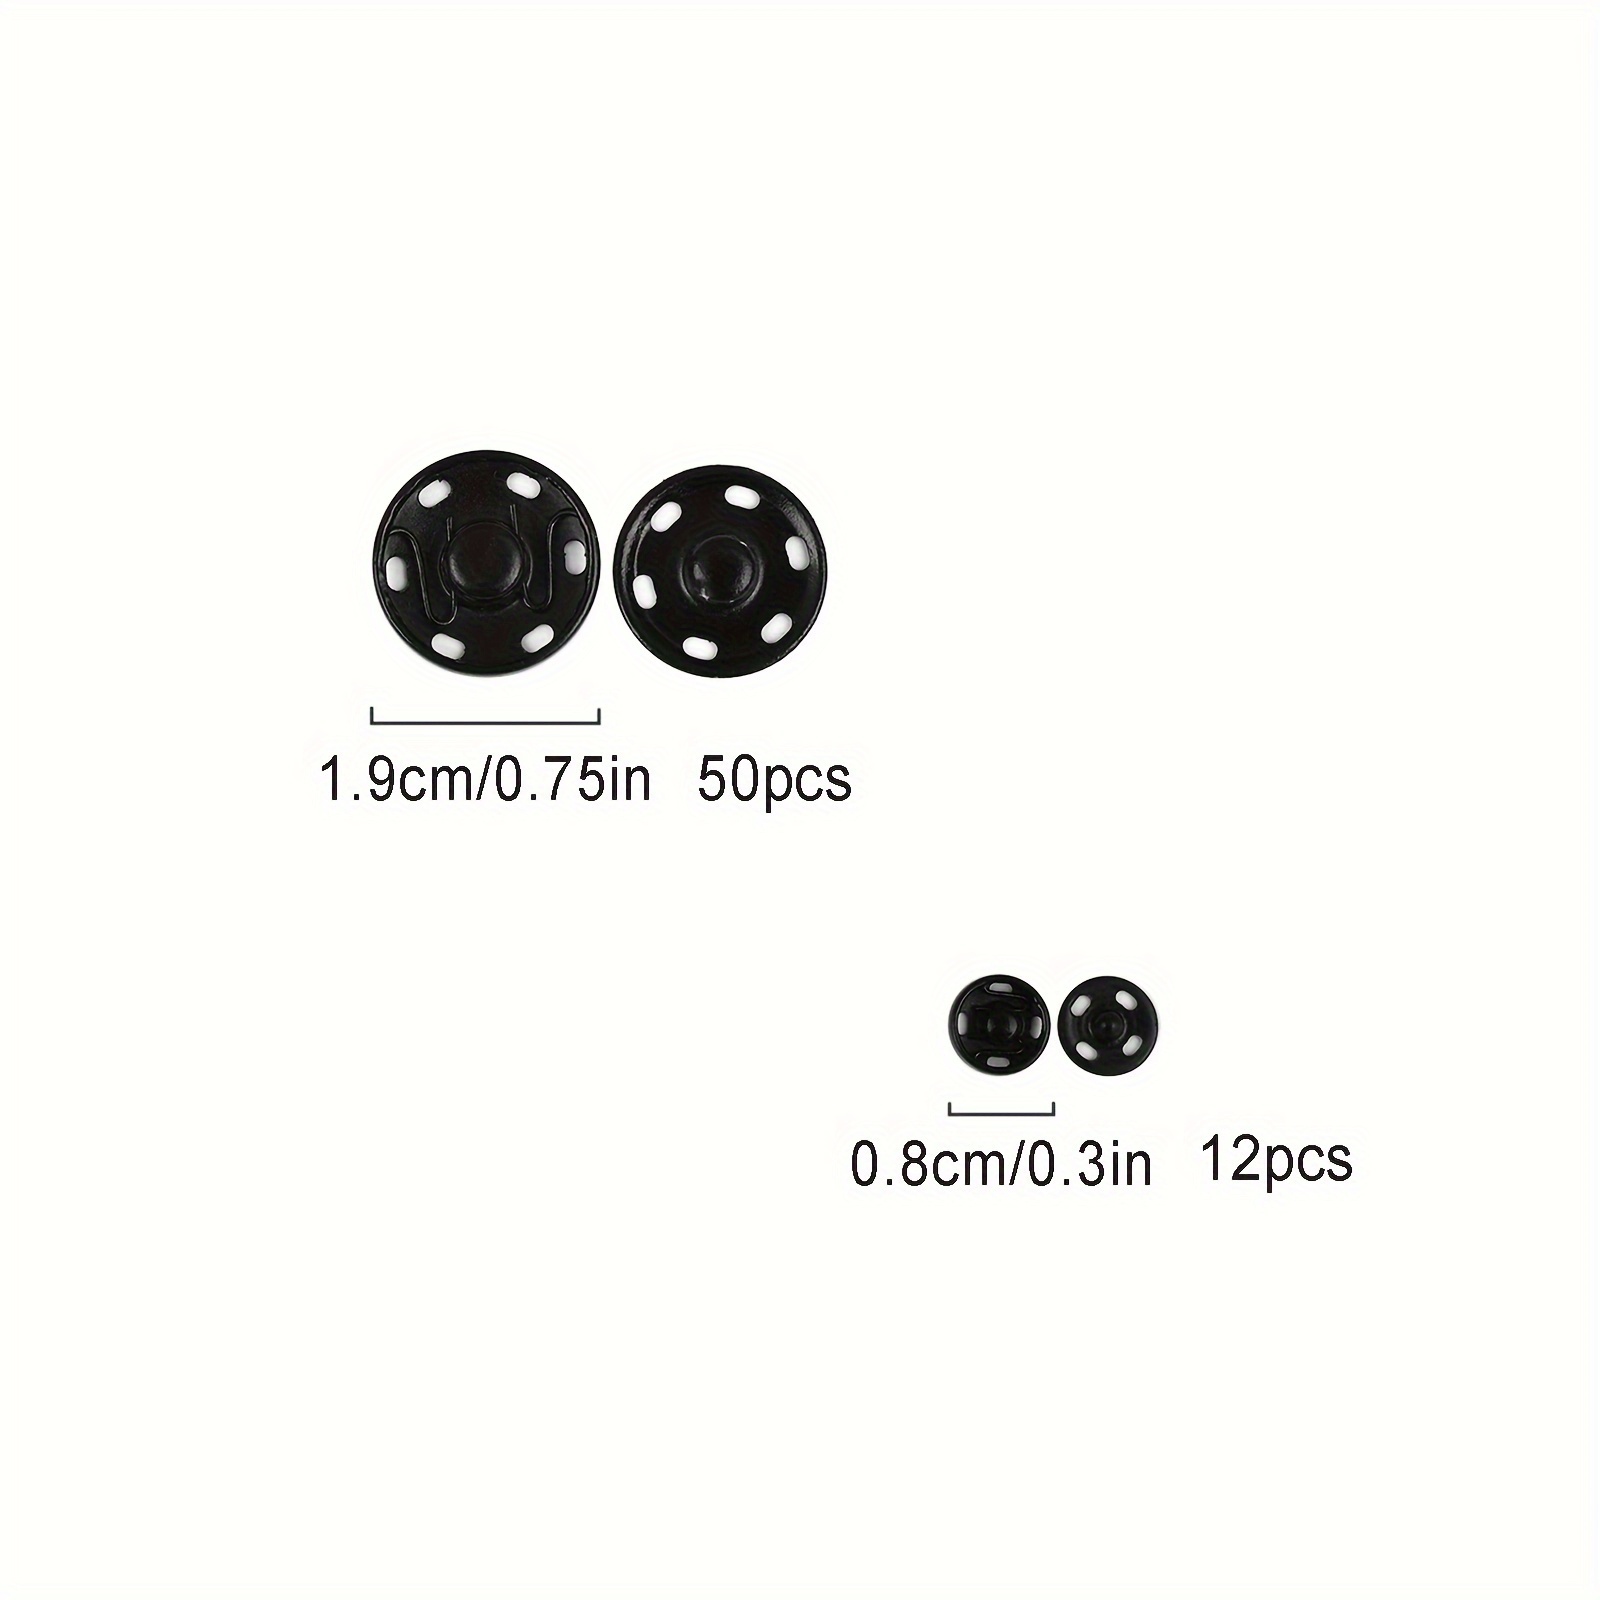 12 50pcs black white small metal snap fasteners press button stud sewing clothing accessories embedded buckle wide use